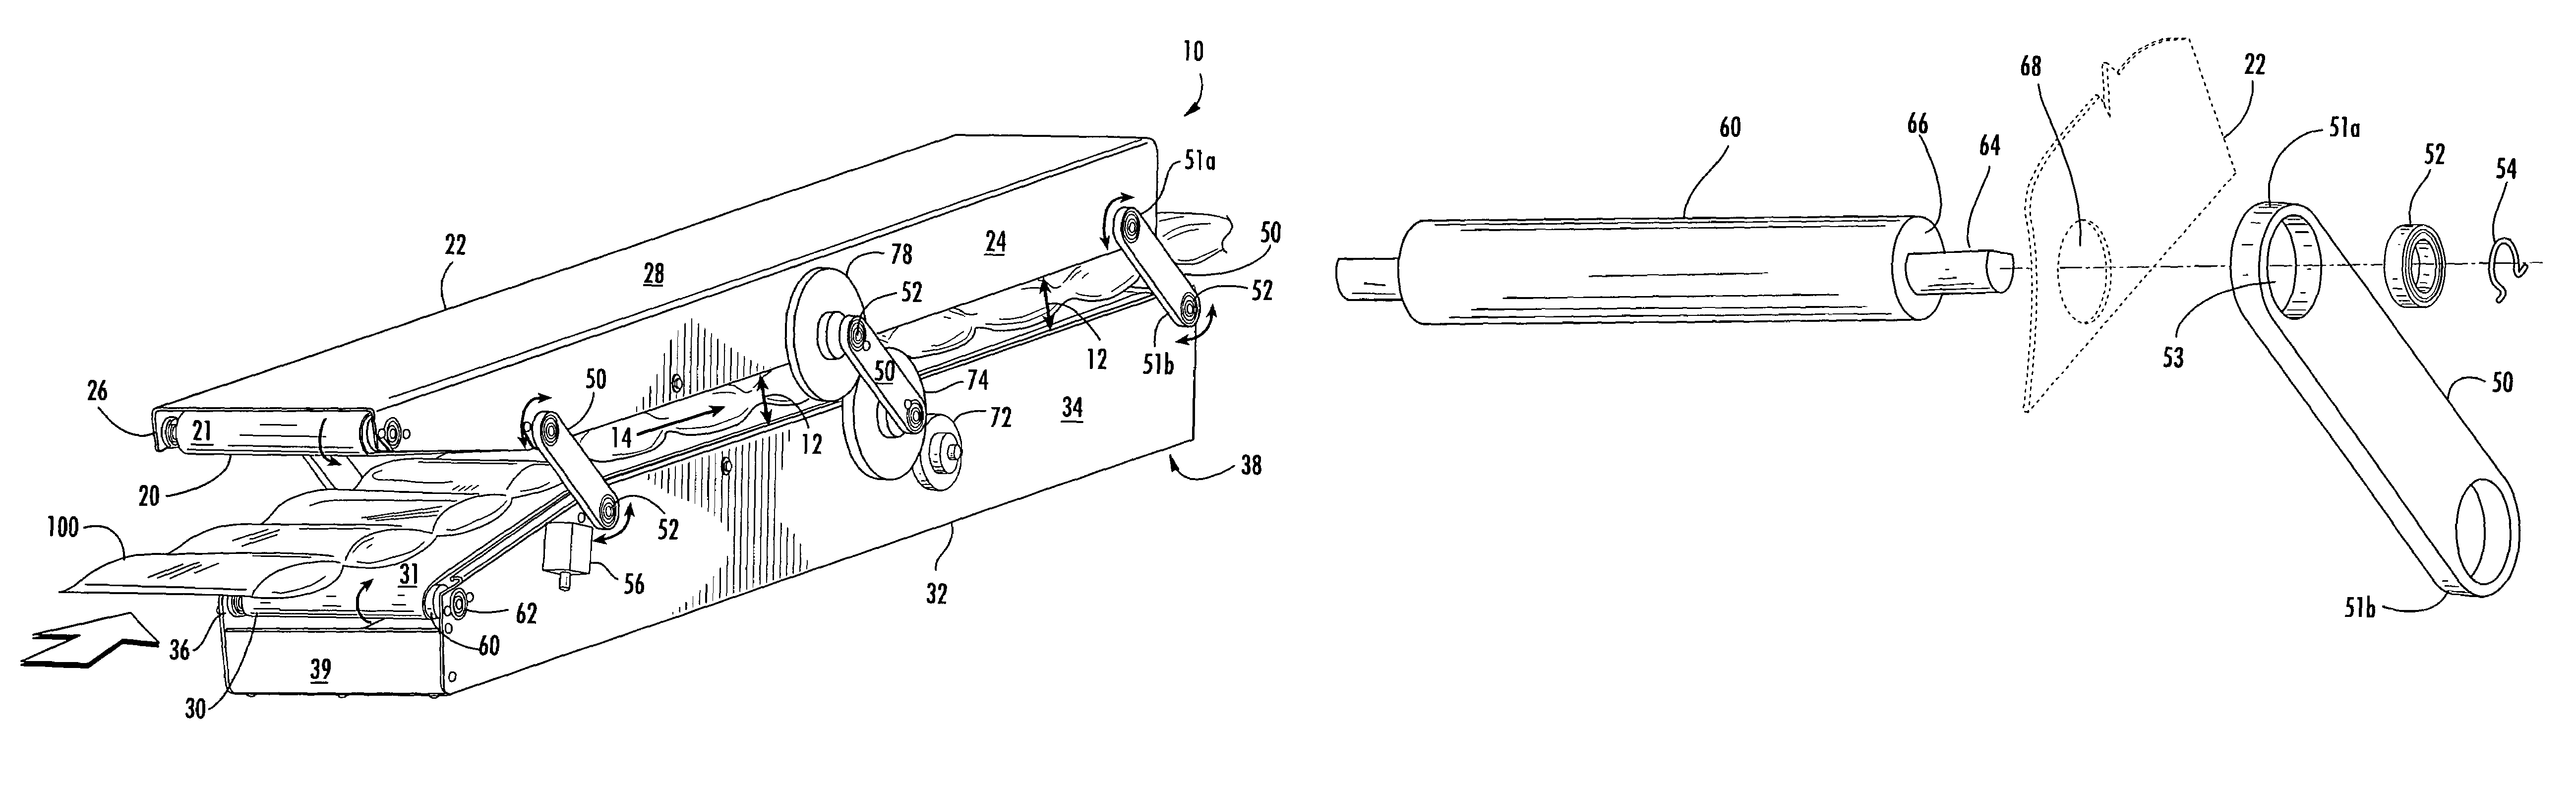 Apparatus and system for detecting under-filled cushions